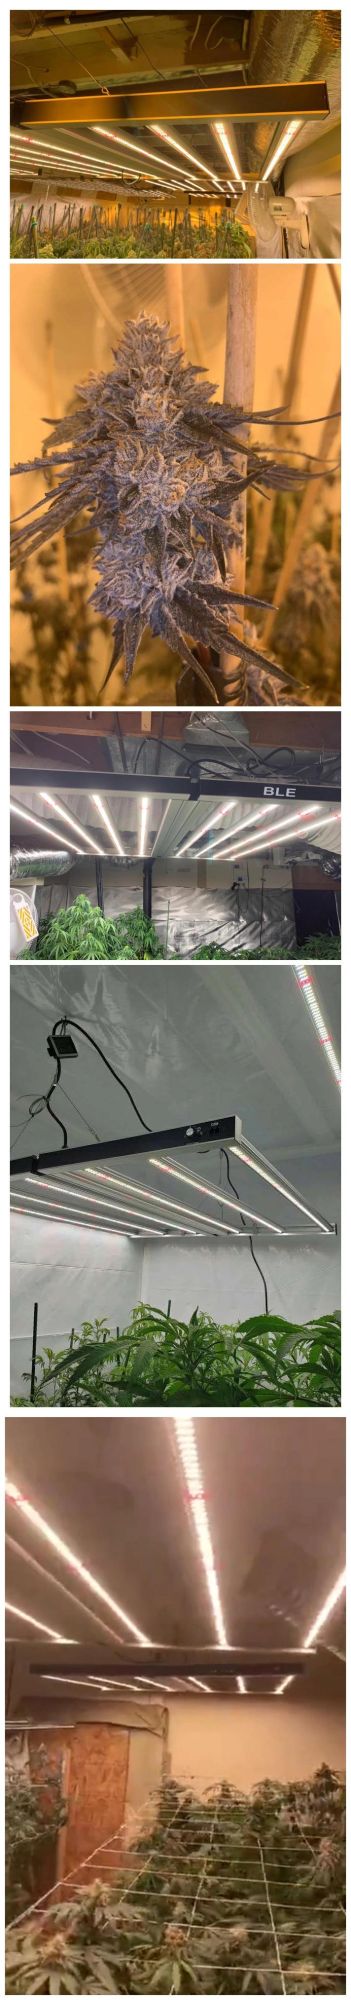 Commercial Greenhouse Growing Systems 4000K Full Spectrum 880W LED Grow Light Fixtures Best for Hydroponic Supplemental Light